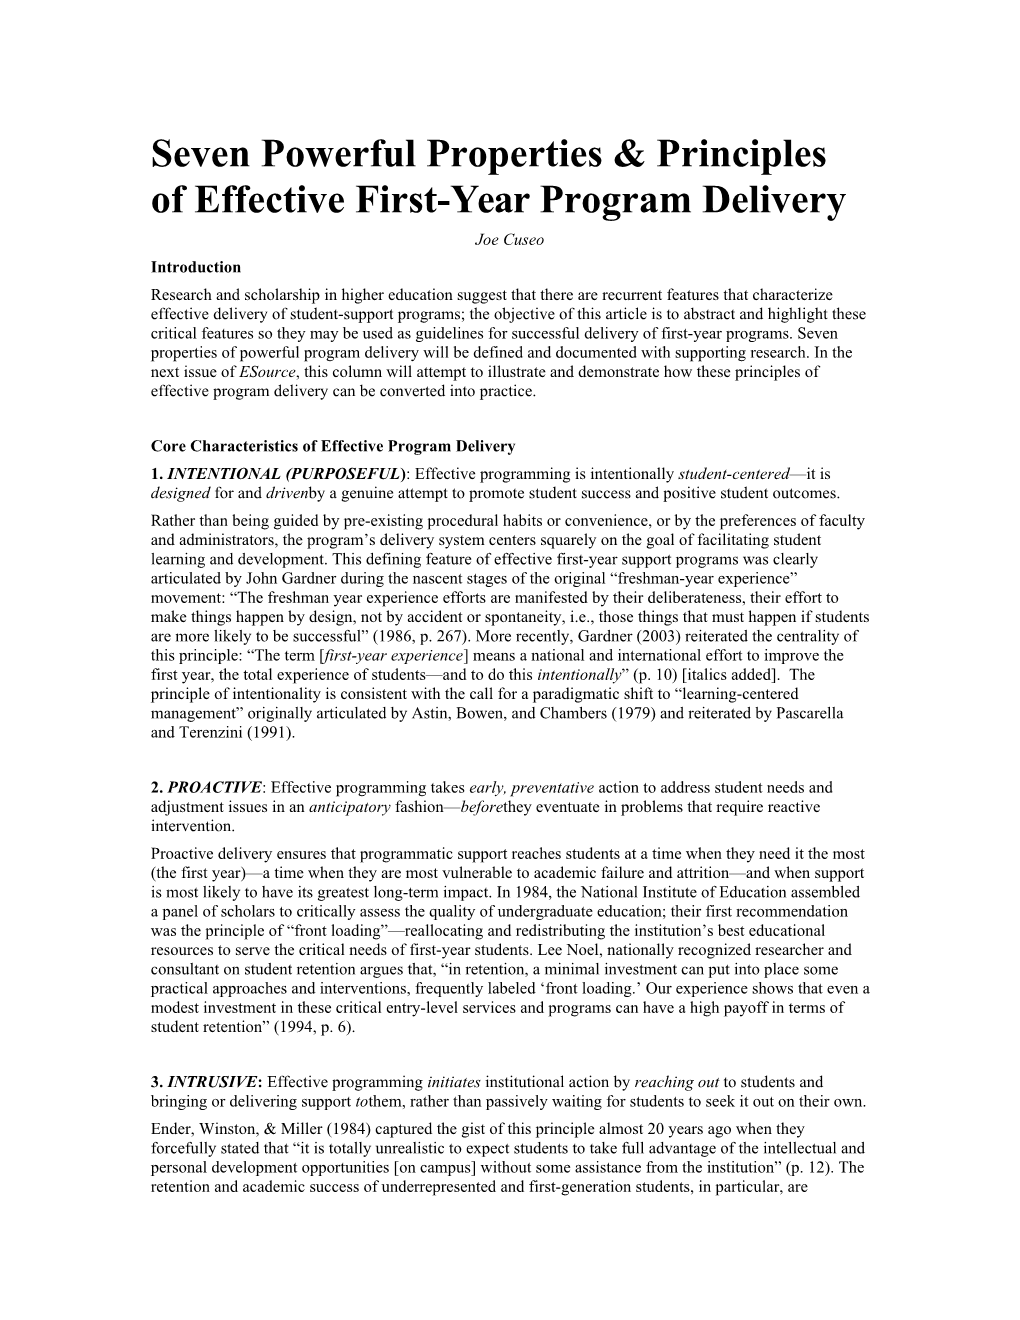 Seven Powerful Properties & Principles of Effective First-Year Program Delivery